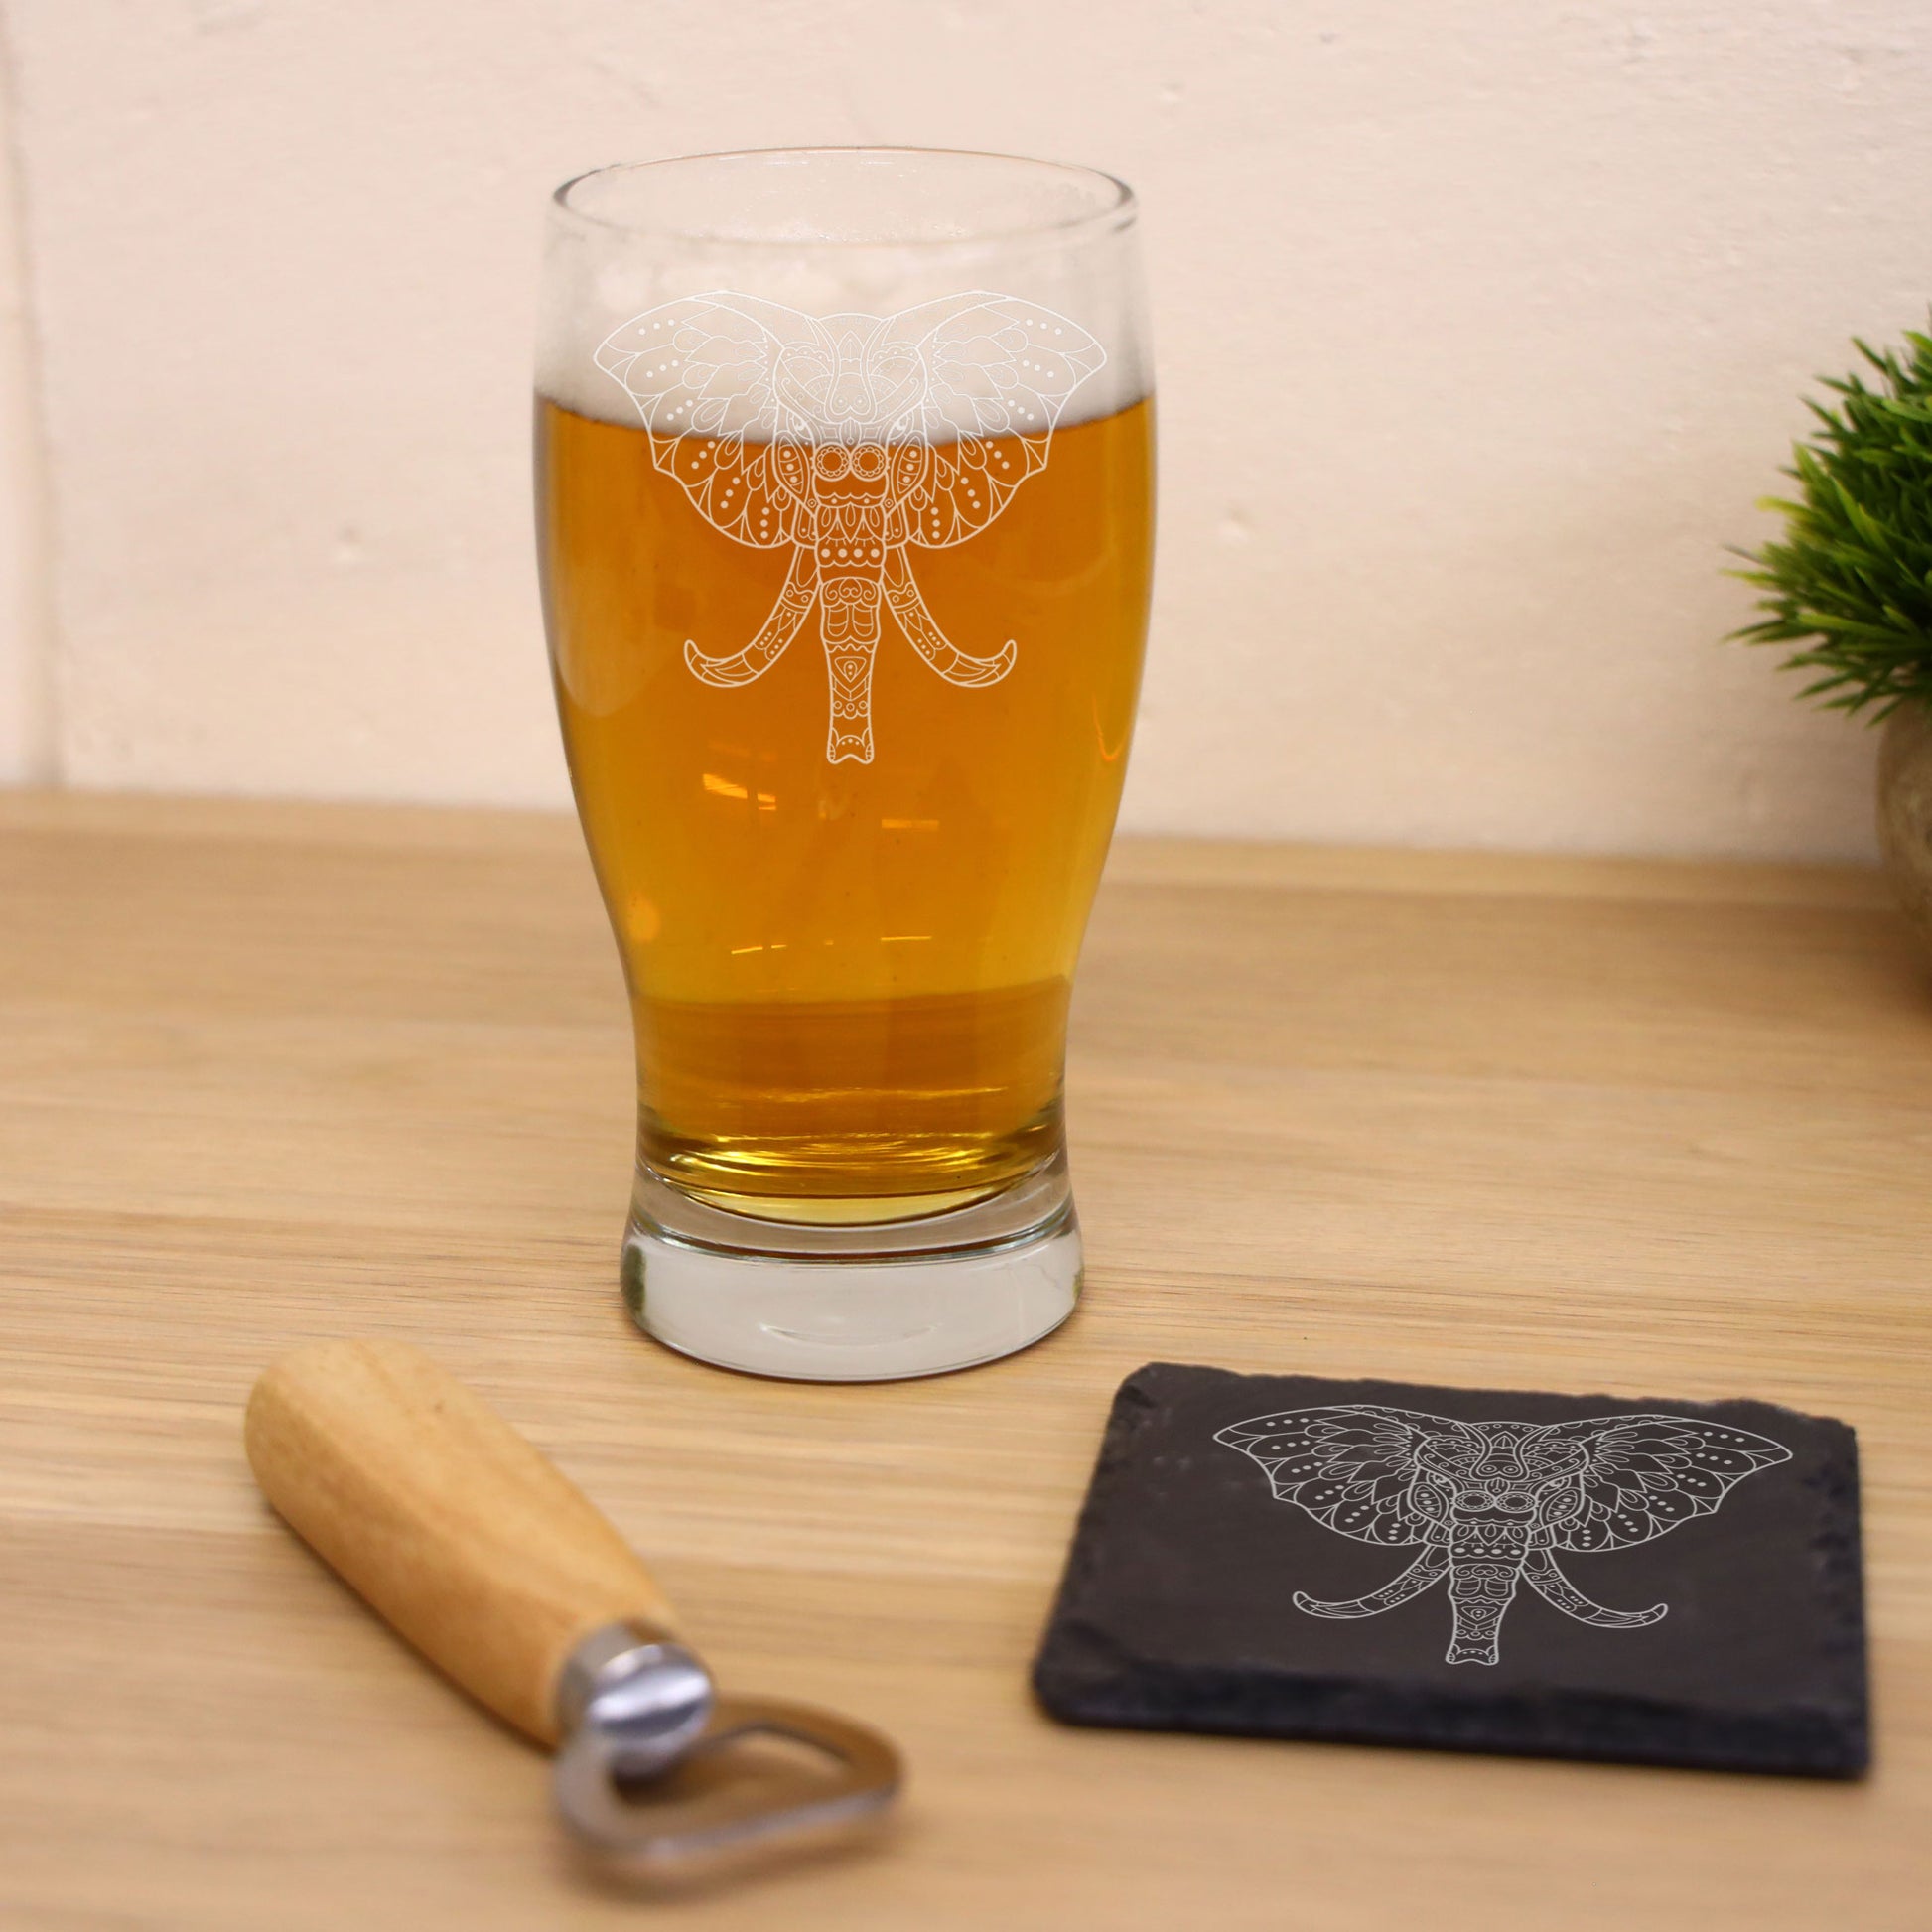 Elephant Mandala Engraved Beer Glass and/or Coaster Set  - Always Looking Good - Glass & Square Coaster Set  